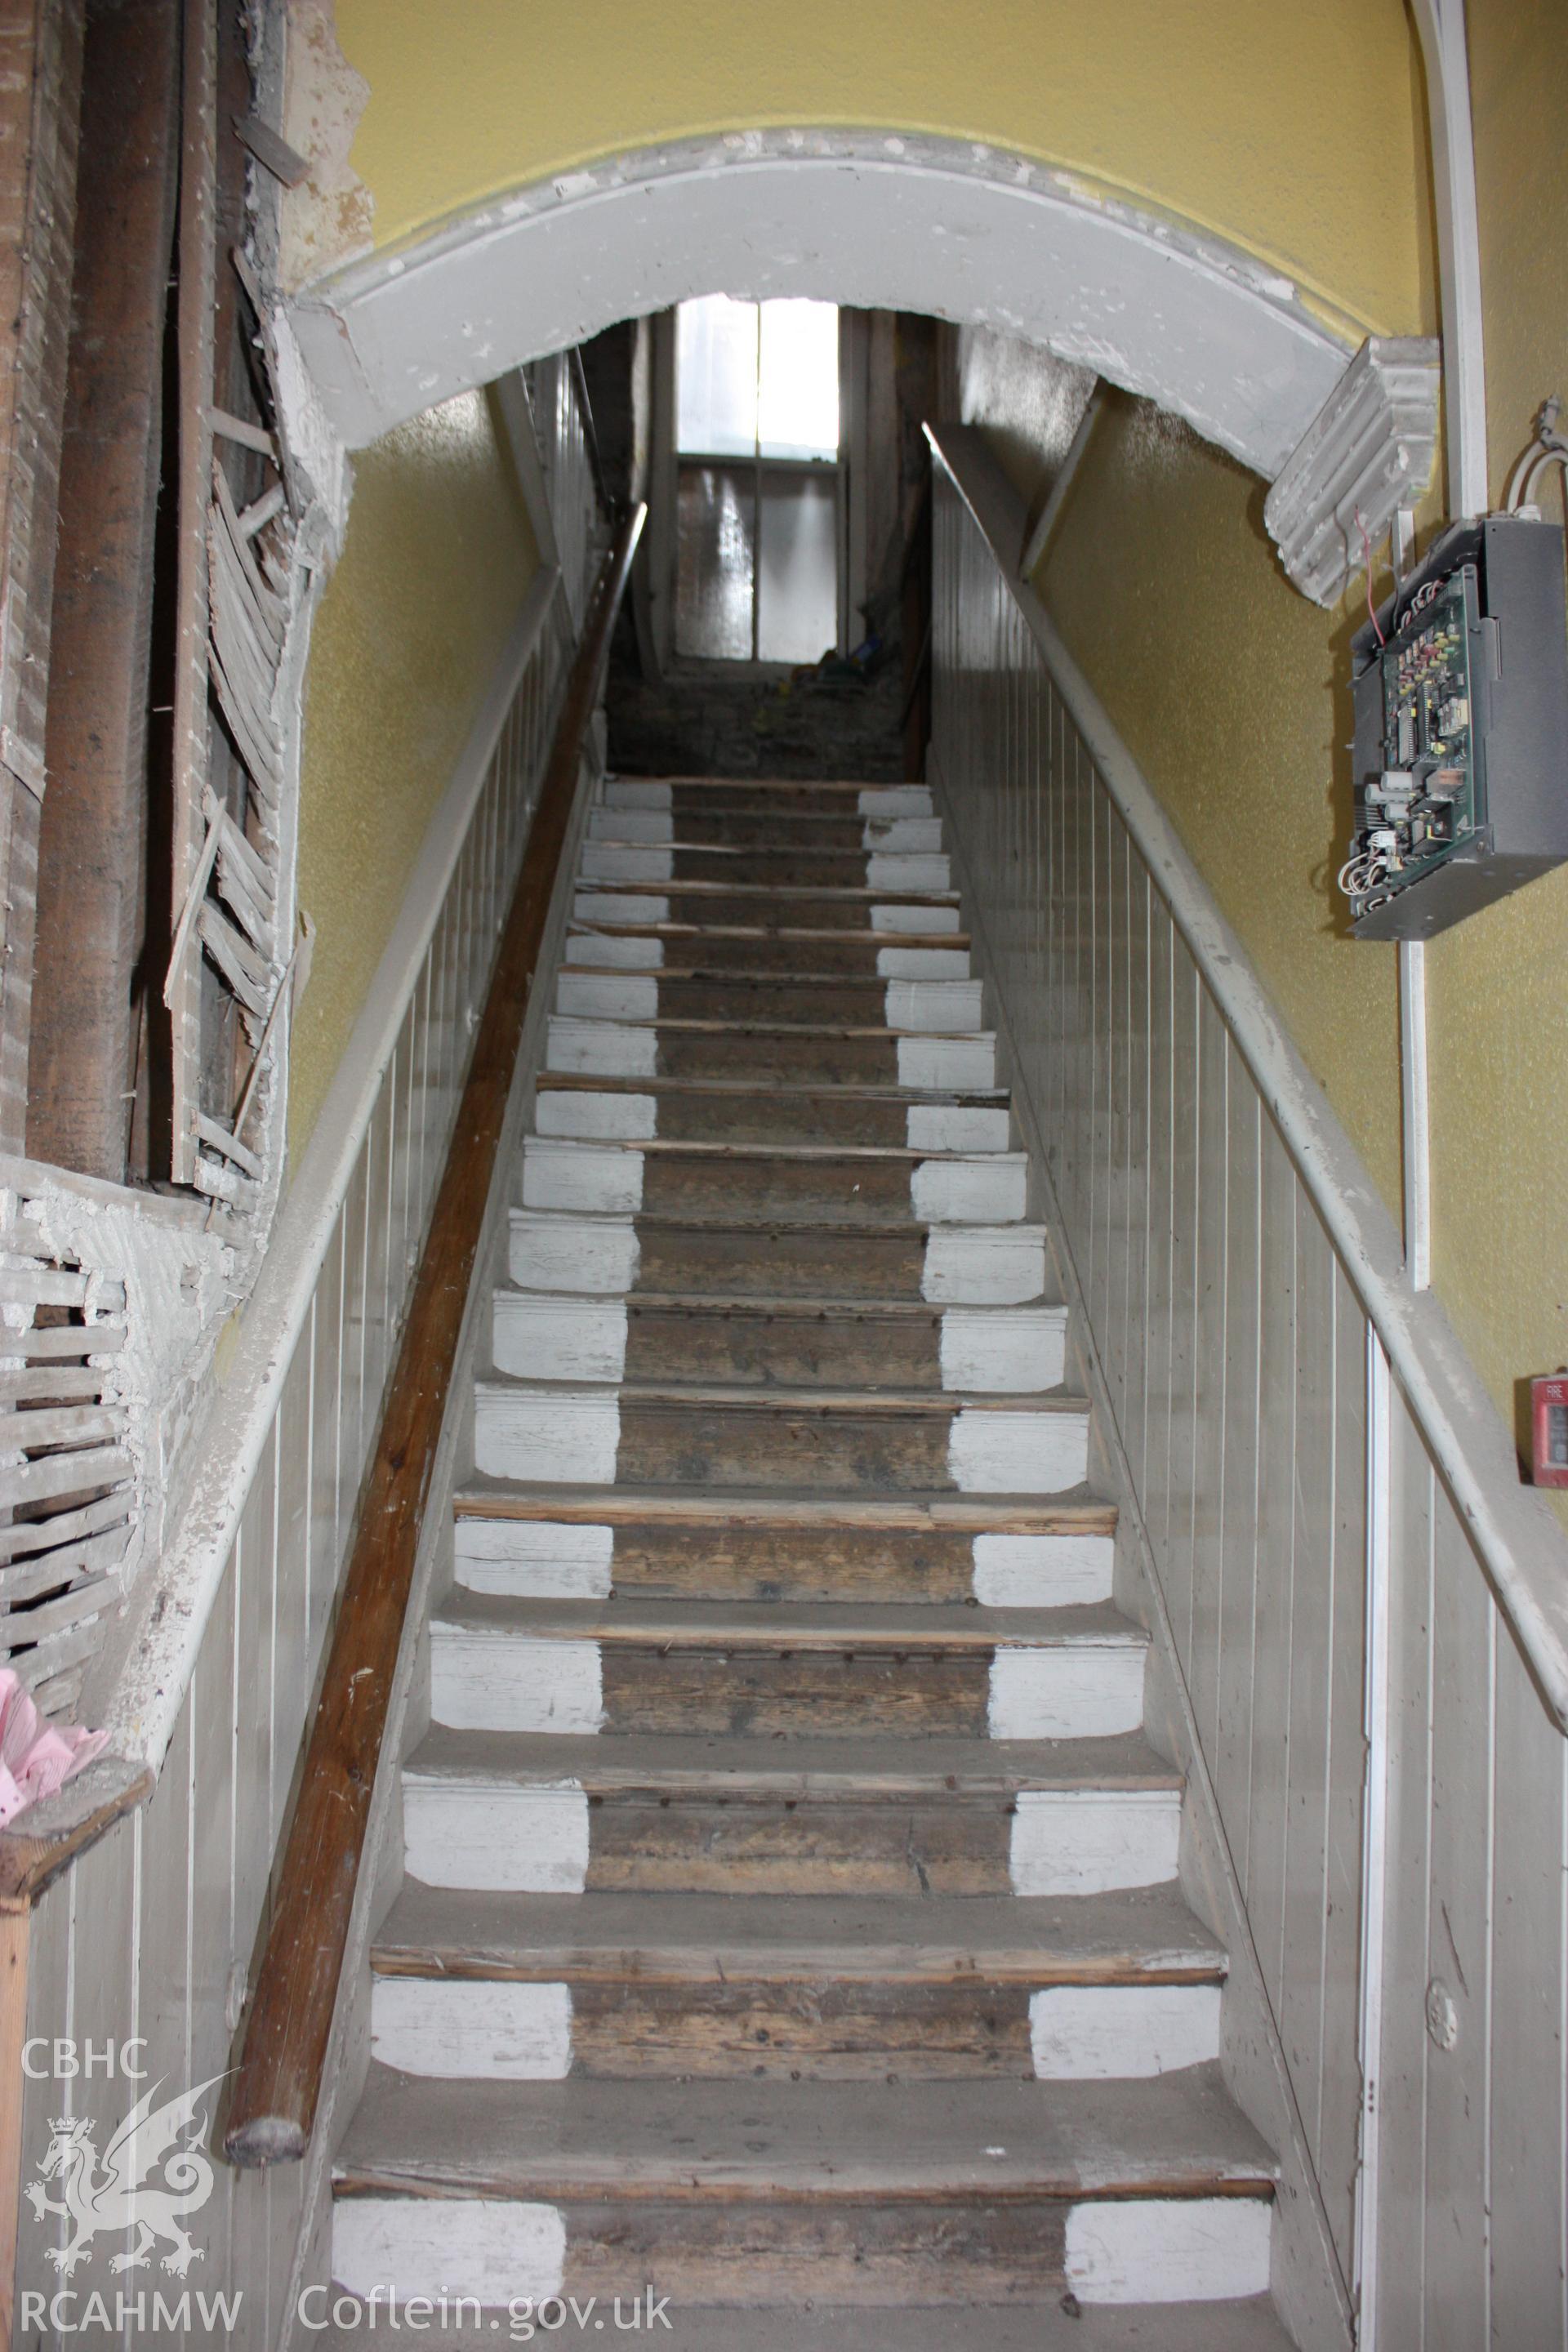 Colour photograph showing interior view of ground floor stair at the right hand entrance of the Old Auction Rooms/ Liberal Club in Aberystwyth. Photographic survey conducted by Geoff Ward on 9th June 2010 during repair work prior to conversion into flats.